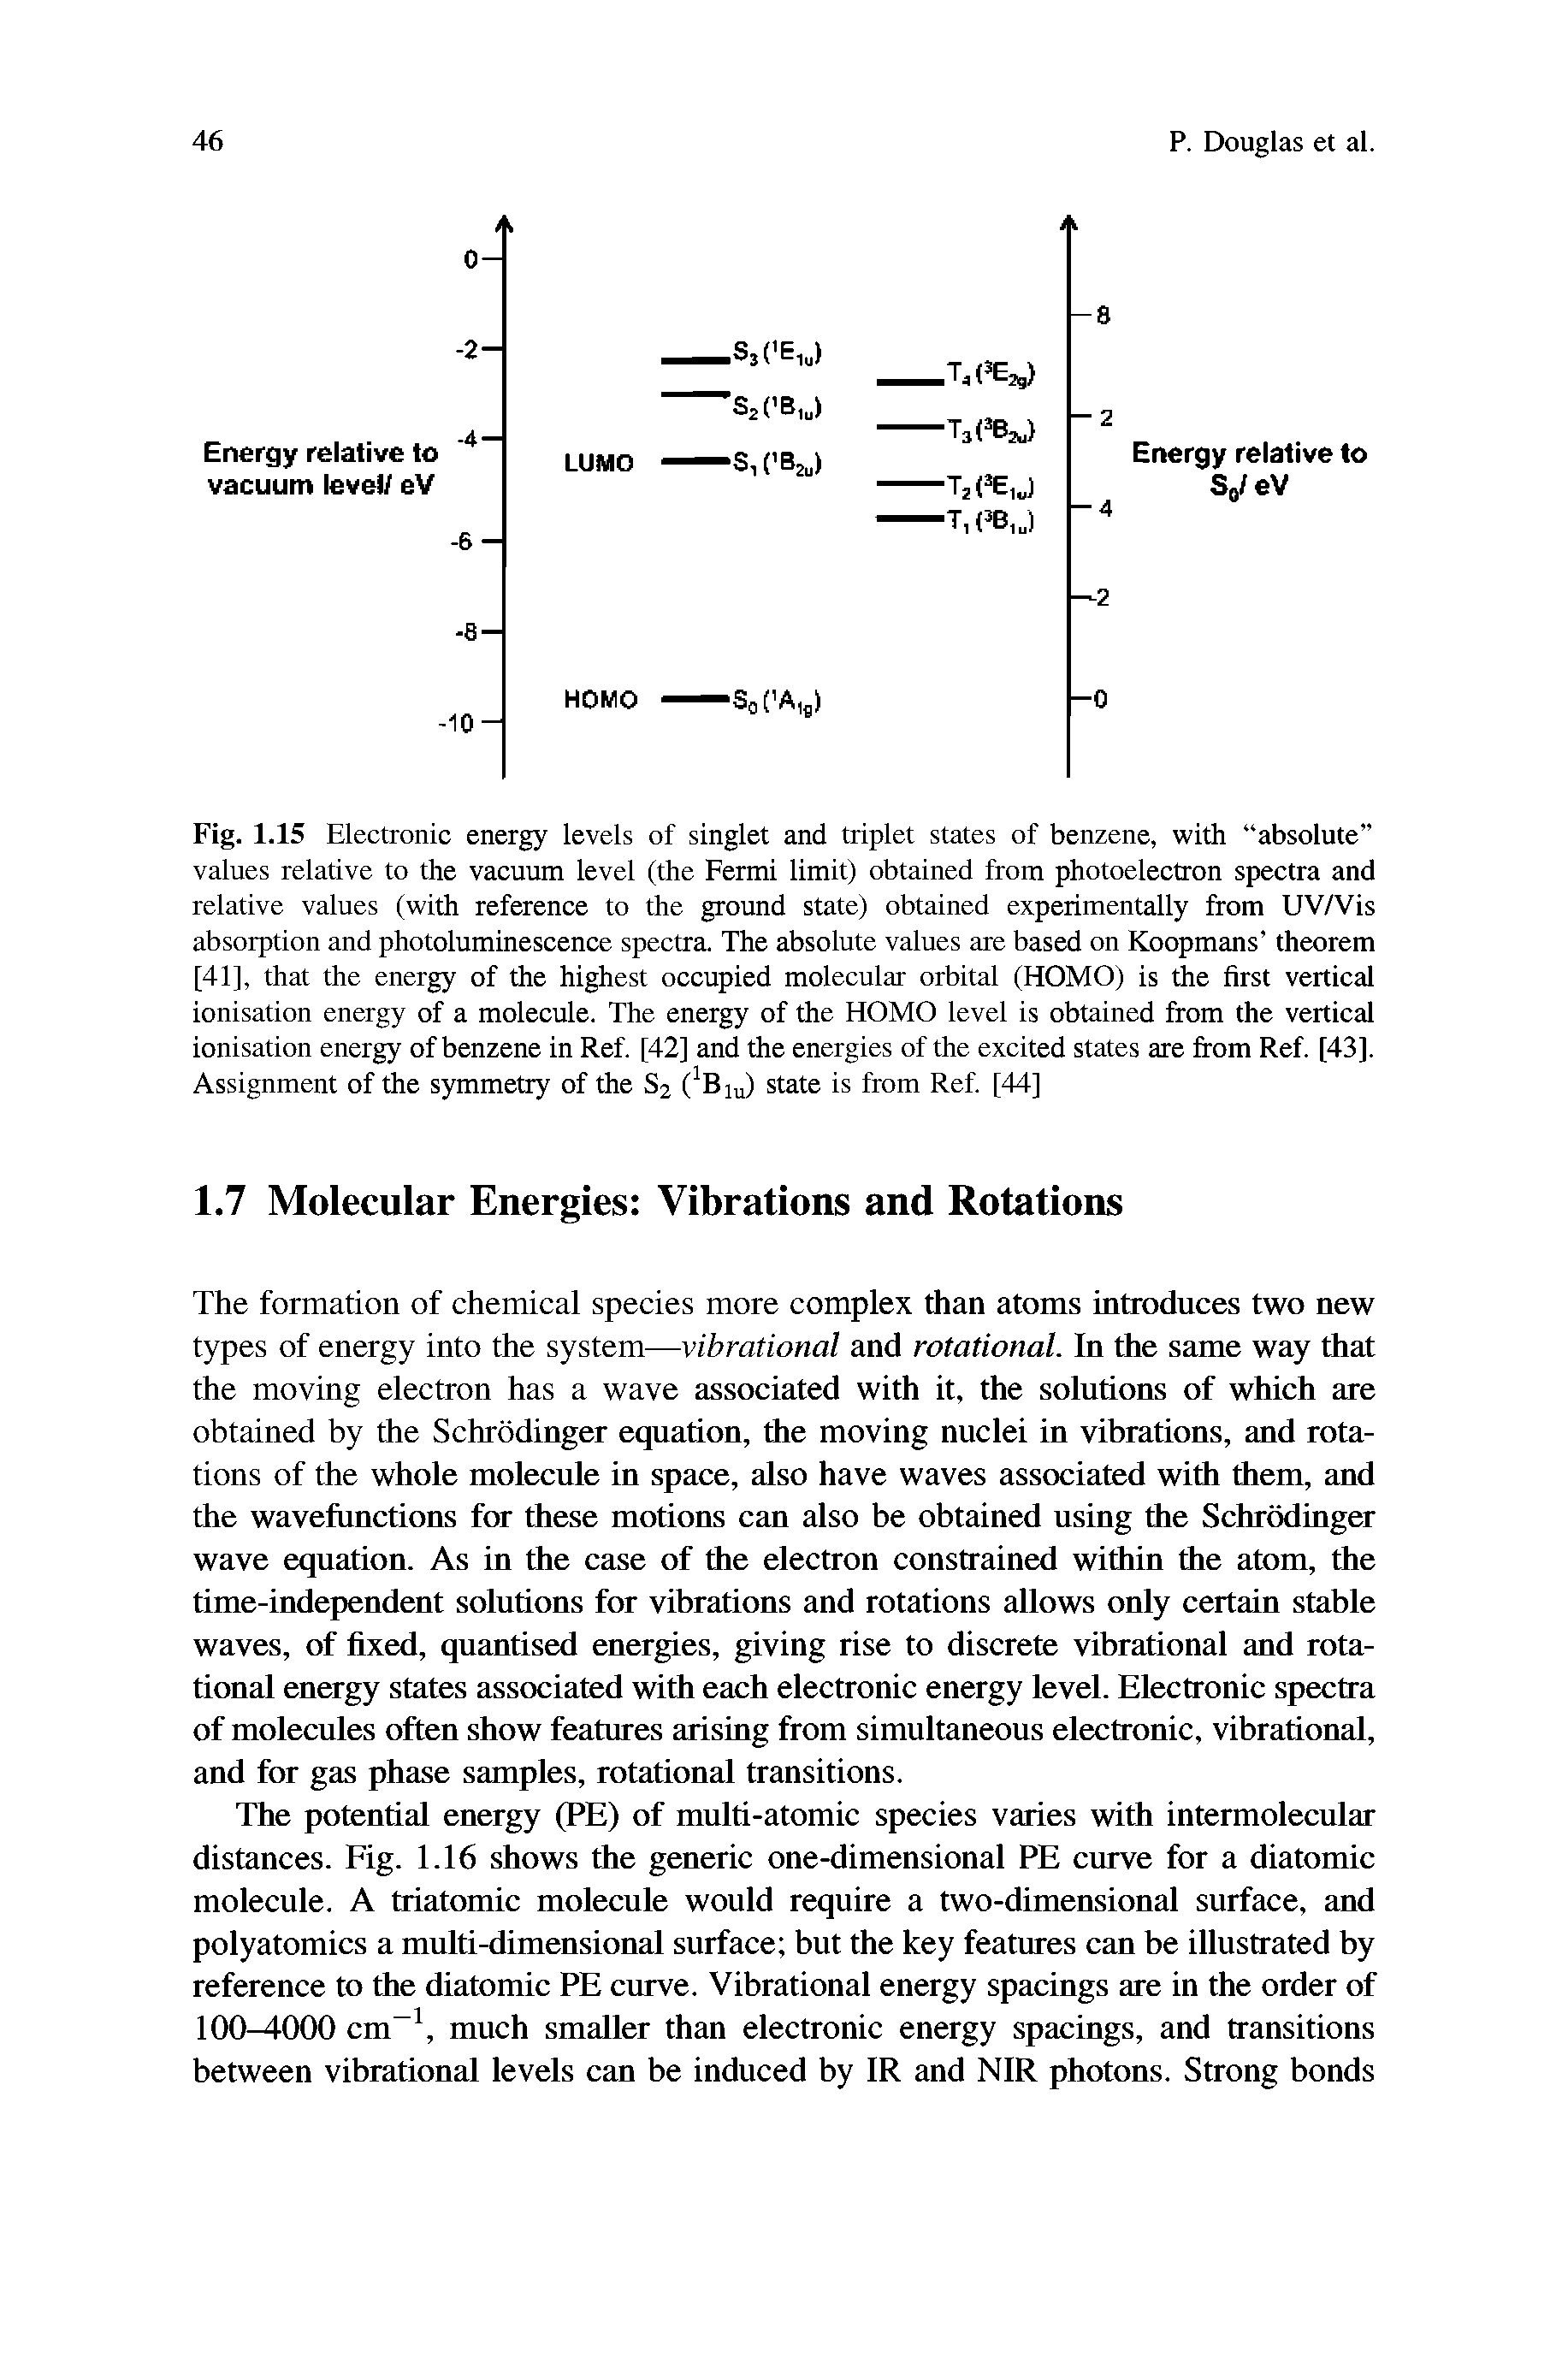 Fig. 1.15 Electronic energy levels of singlet and triplet states of benzene, with absolute values relative to the vacuum level (the Fermi limit) obtained from photoelectron spectra and relative values (with reference to the ground state) obtained experimentally from UV/Vis absorption and photoluminescence spectra. The absolute values are based on Koopmans theorem [41], that the energy of the highest occupied molecular orbital (HOMO) is the first vertical ionisation energy of a molecule. The energy of the HOMO level is obtained from the vertical ionisation energy of benzene in Ref. [42] and the energies of the excited states are fl om Ref. [43]. Assignment of the symmetry of the S2 ( Bju) state is from Ref. [44]...